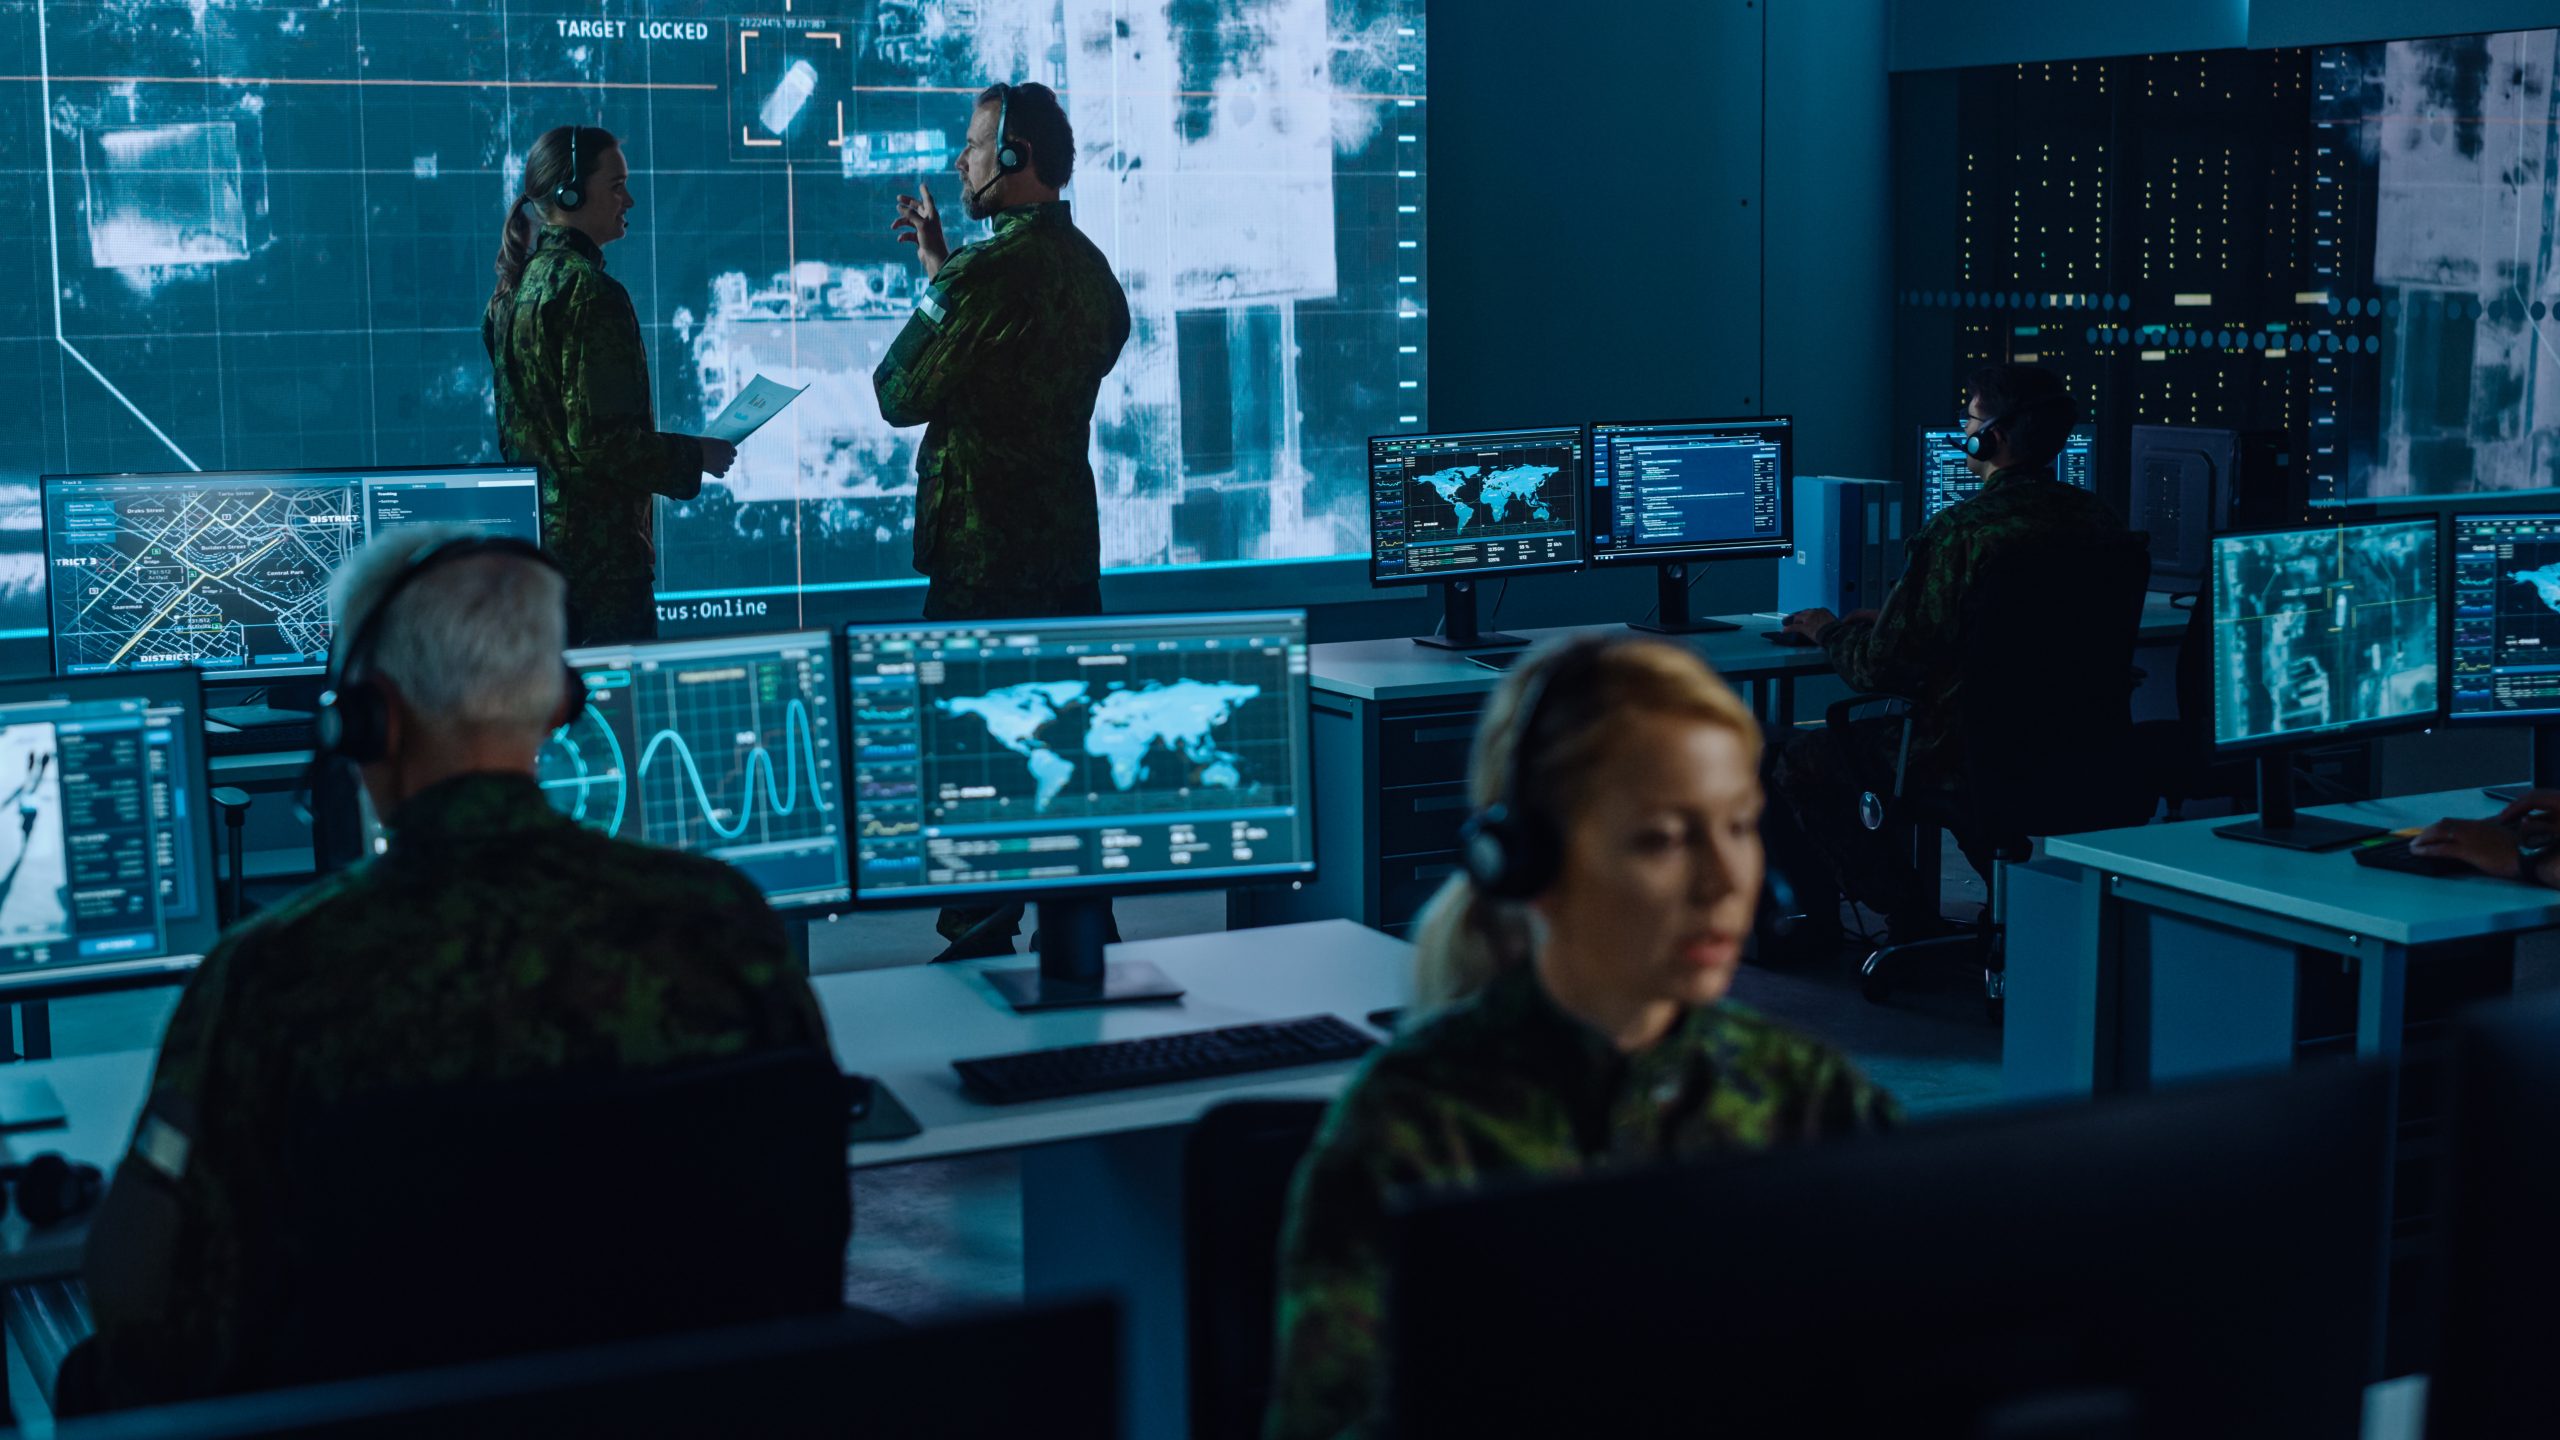 Strategies for Optimizing IP Video Capture and Distribution Across Intelligence Surveillance and Reconnaissance Platforms